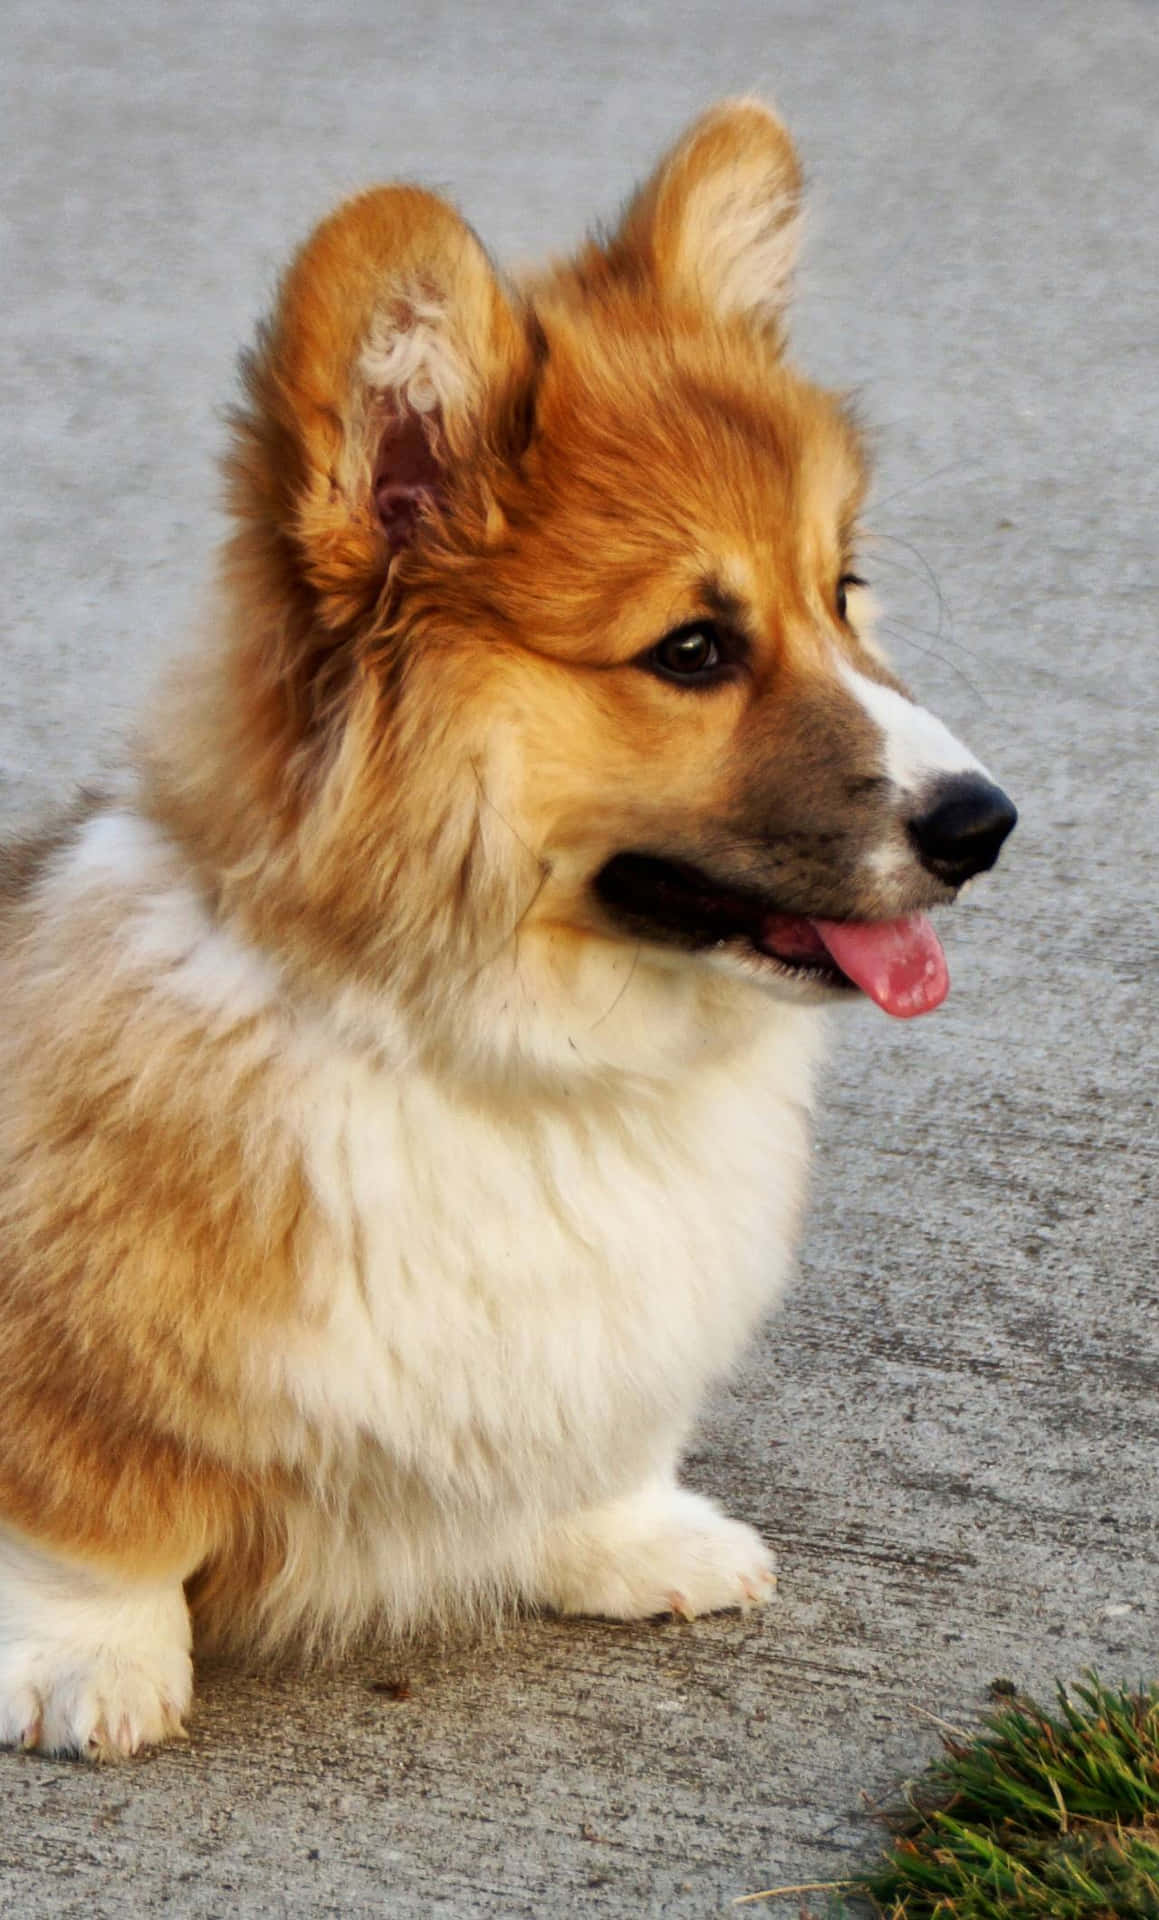 Corgi  A sweet pup with its tongue hanging out!